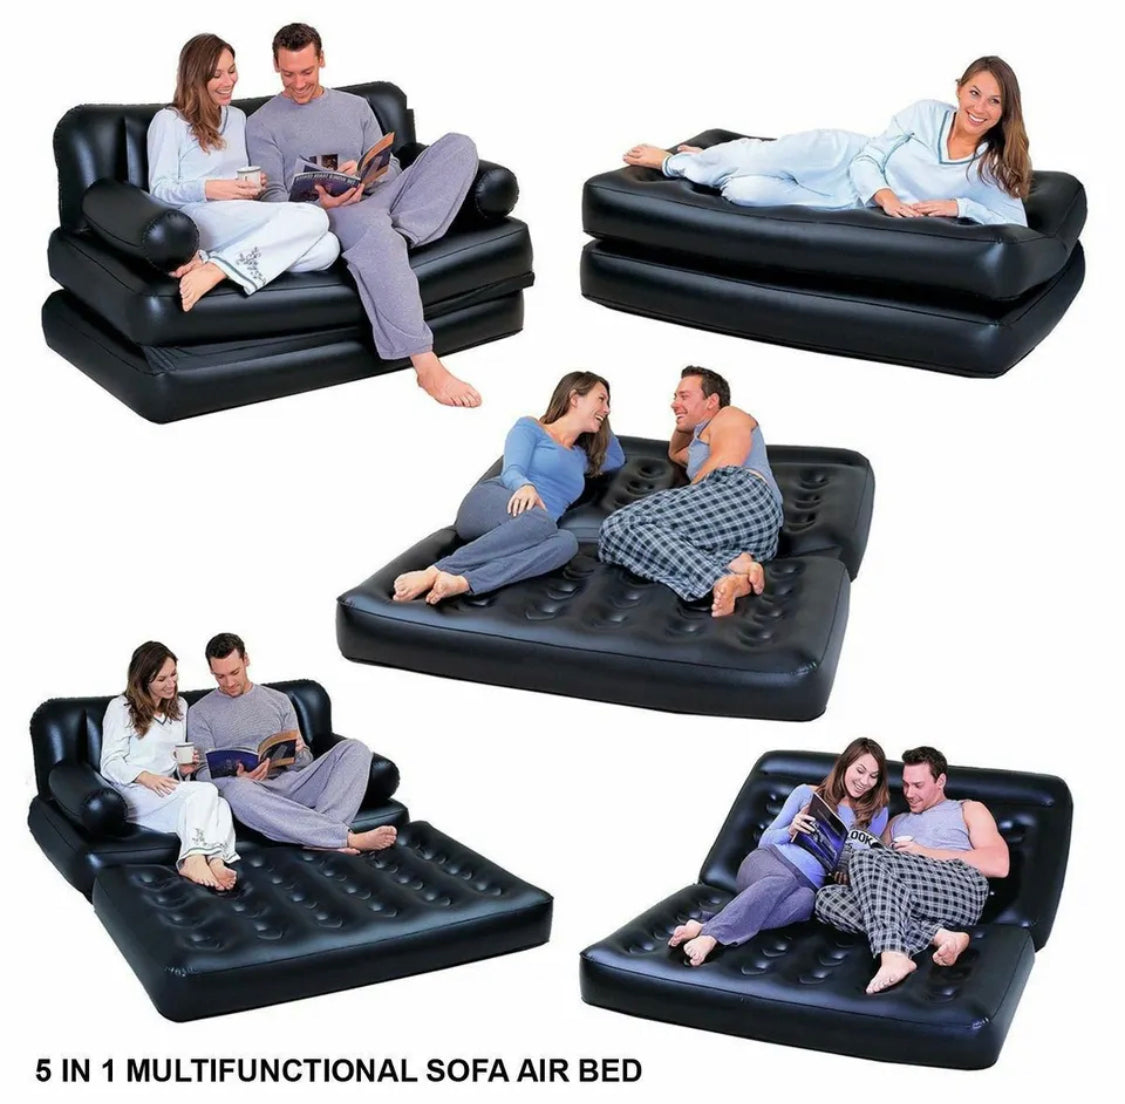 5 in 1 INFLATABLE DOUBLE COUCH SOFA LOUNGER MATTRESS AIRBED + FREE ELECTRIC  PUMP